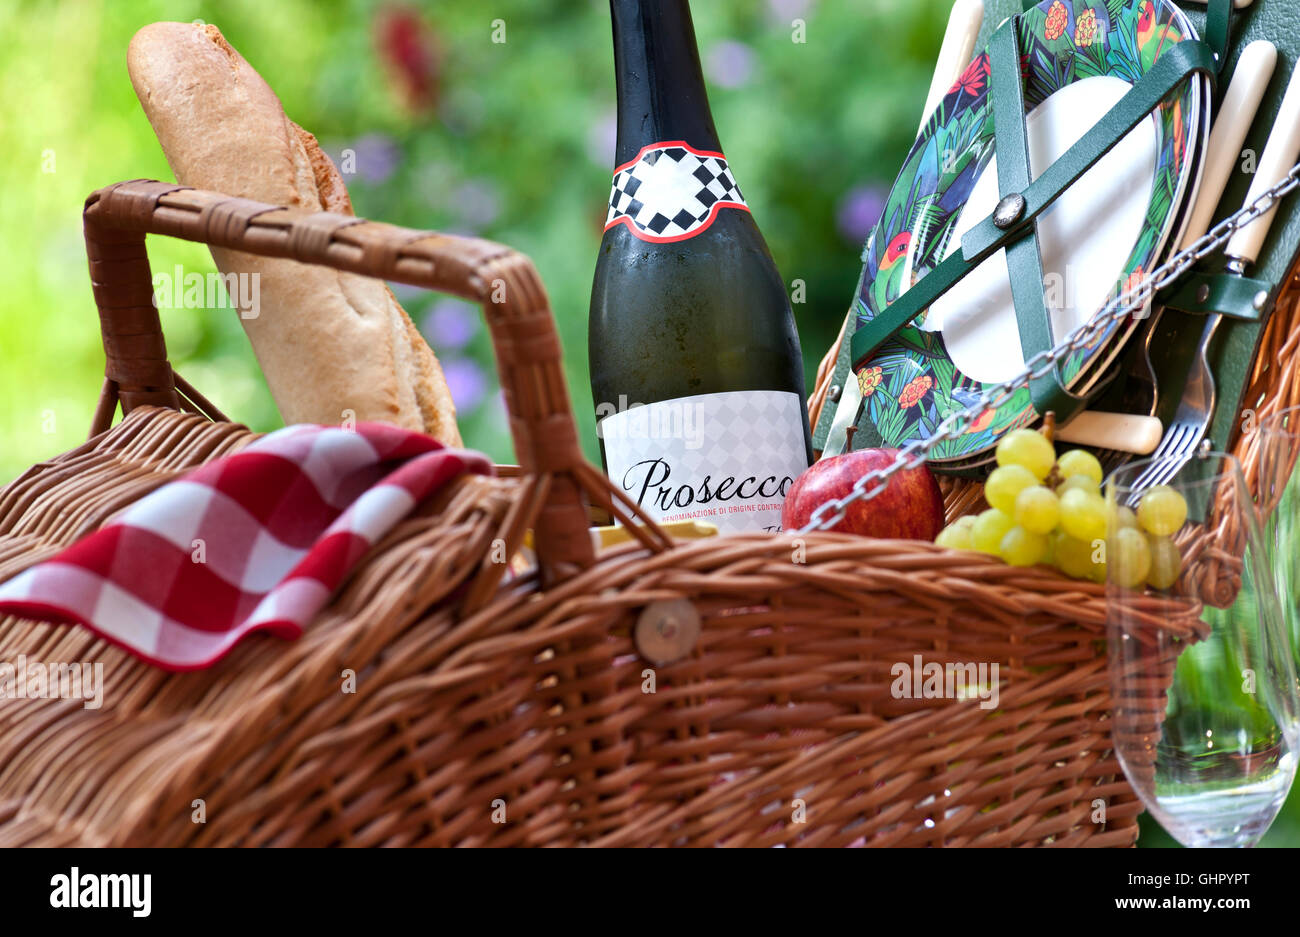 Prosecco wine bottle and wicker picnic basket in sunny floral garden situation Stock Photo